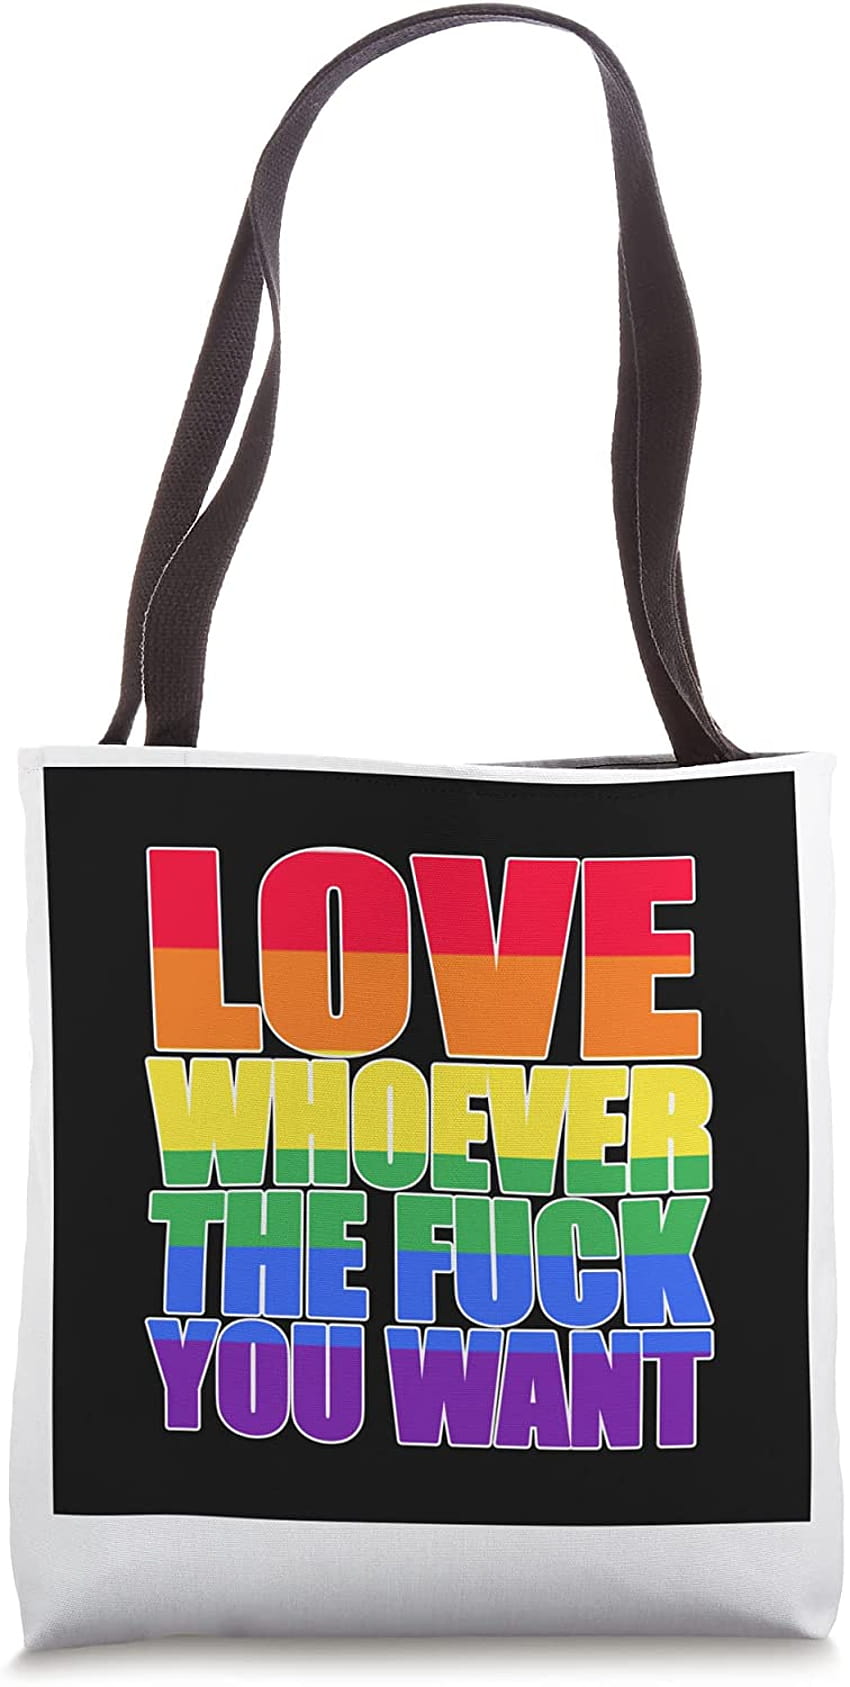 Love whoever the you want LGBT Support Tote Bag : Clothing, Shoes & Jewelry, love whoever you want HD phone wallpaper